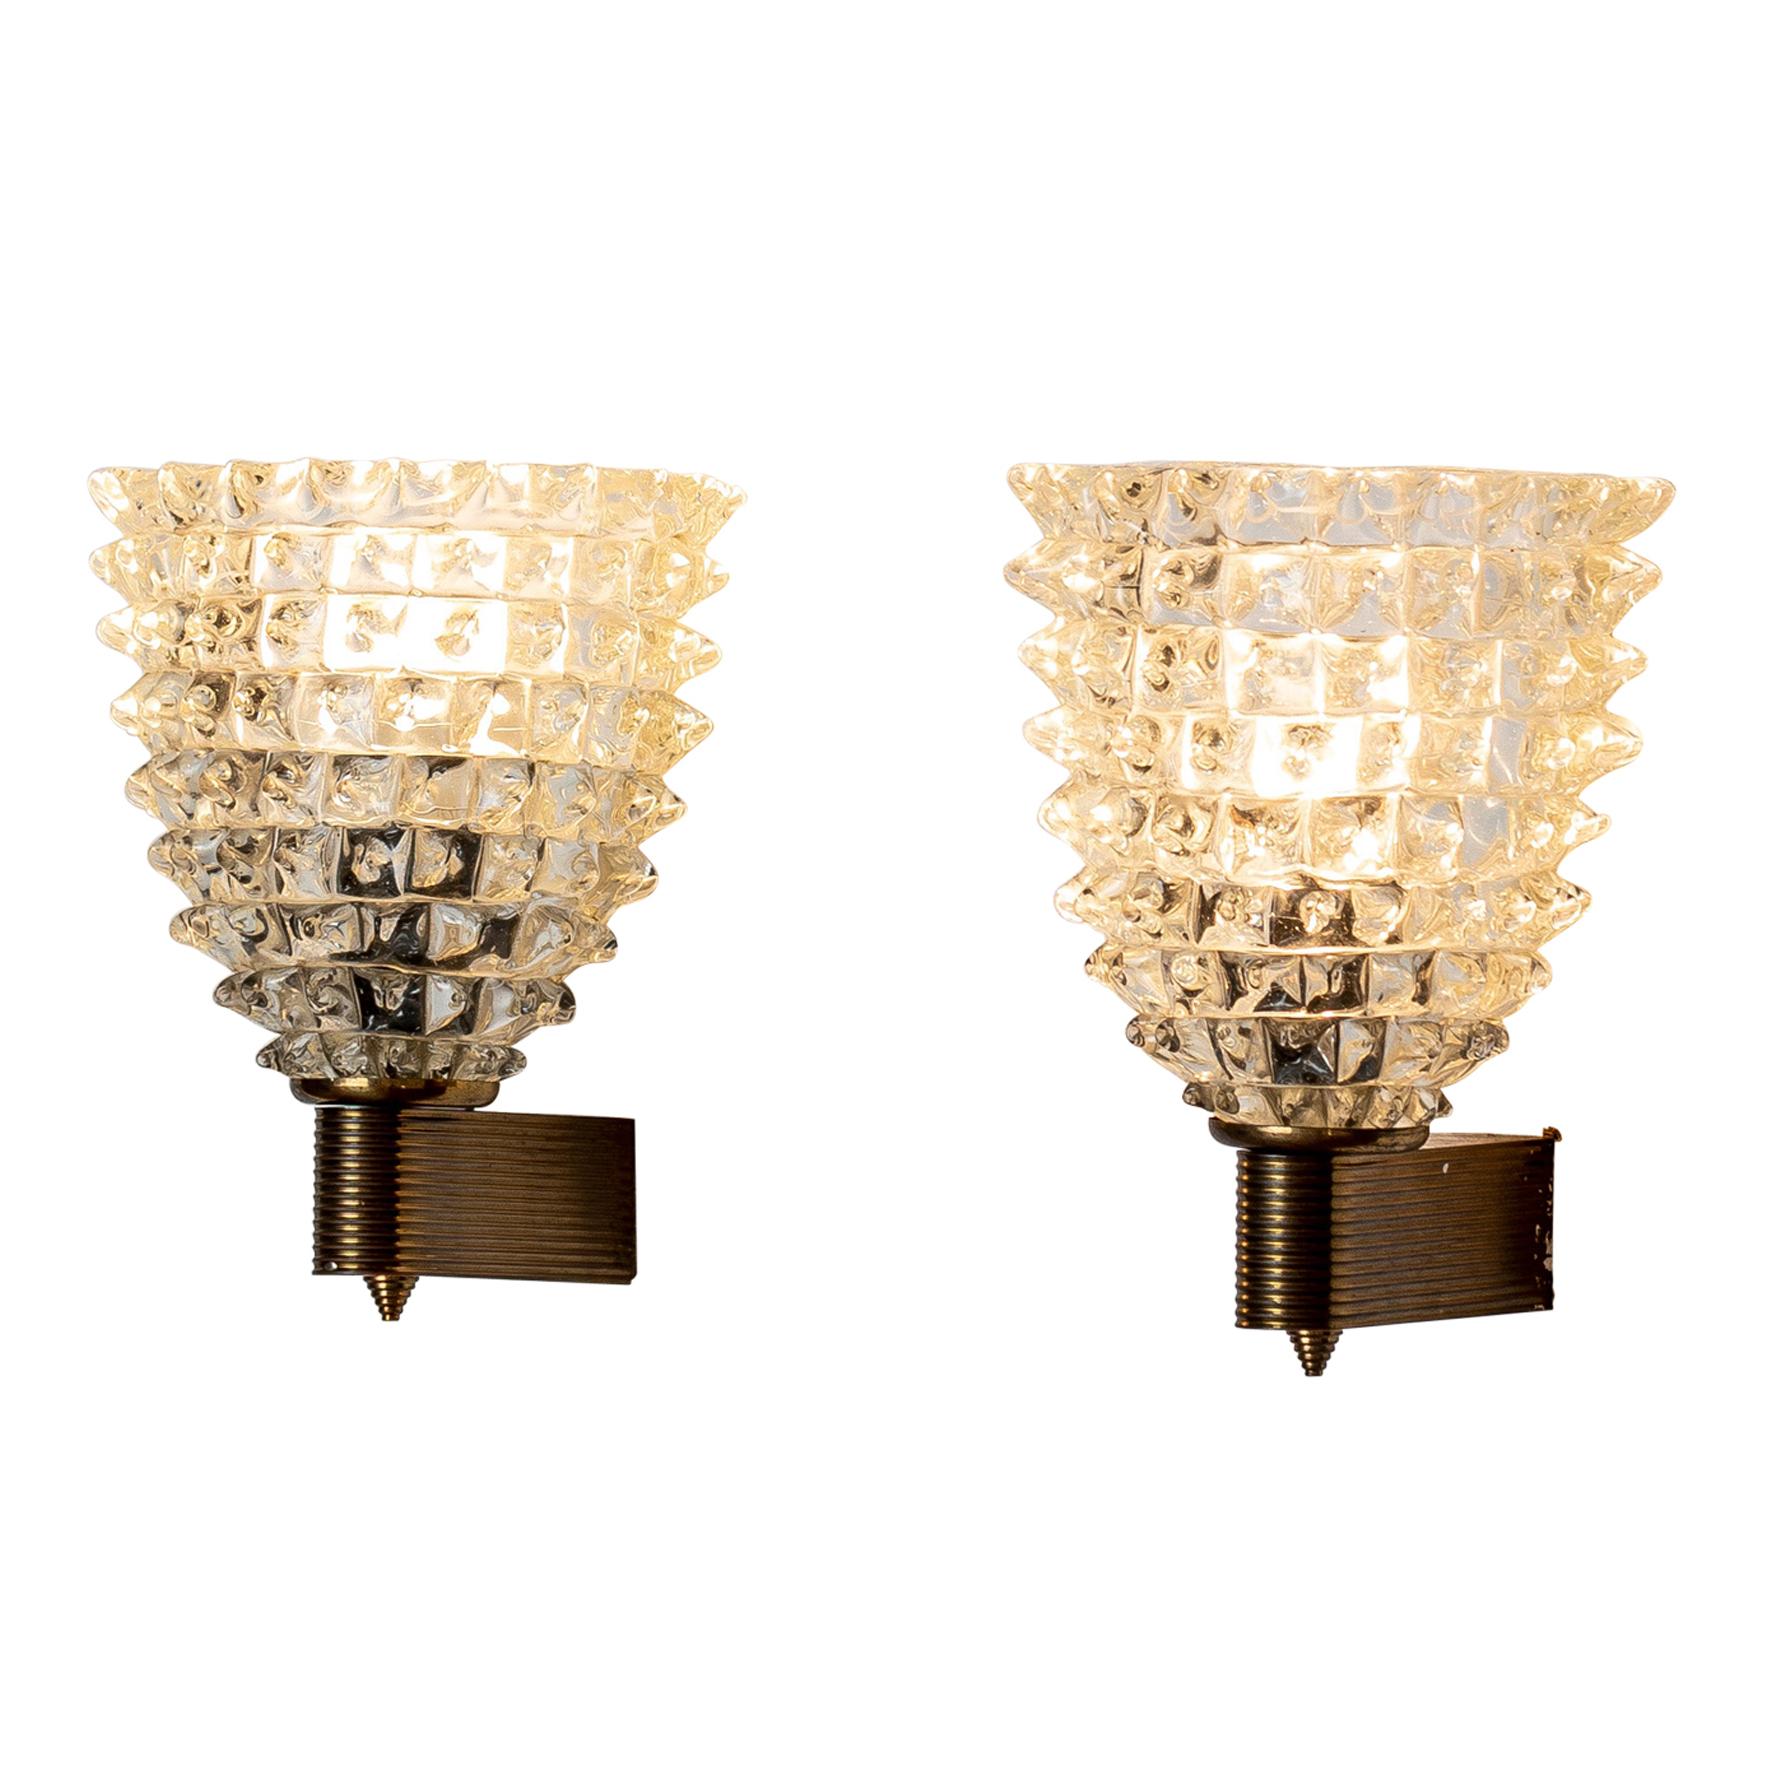 Pair of Brass and Murano Glass Barovier e Toso Sconces, c. 1950